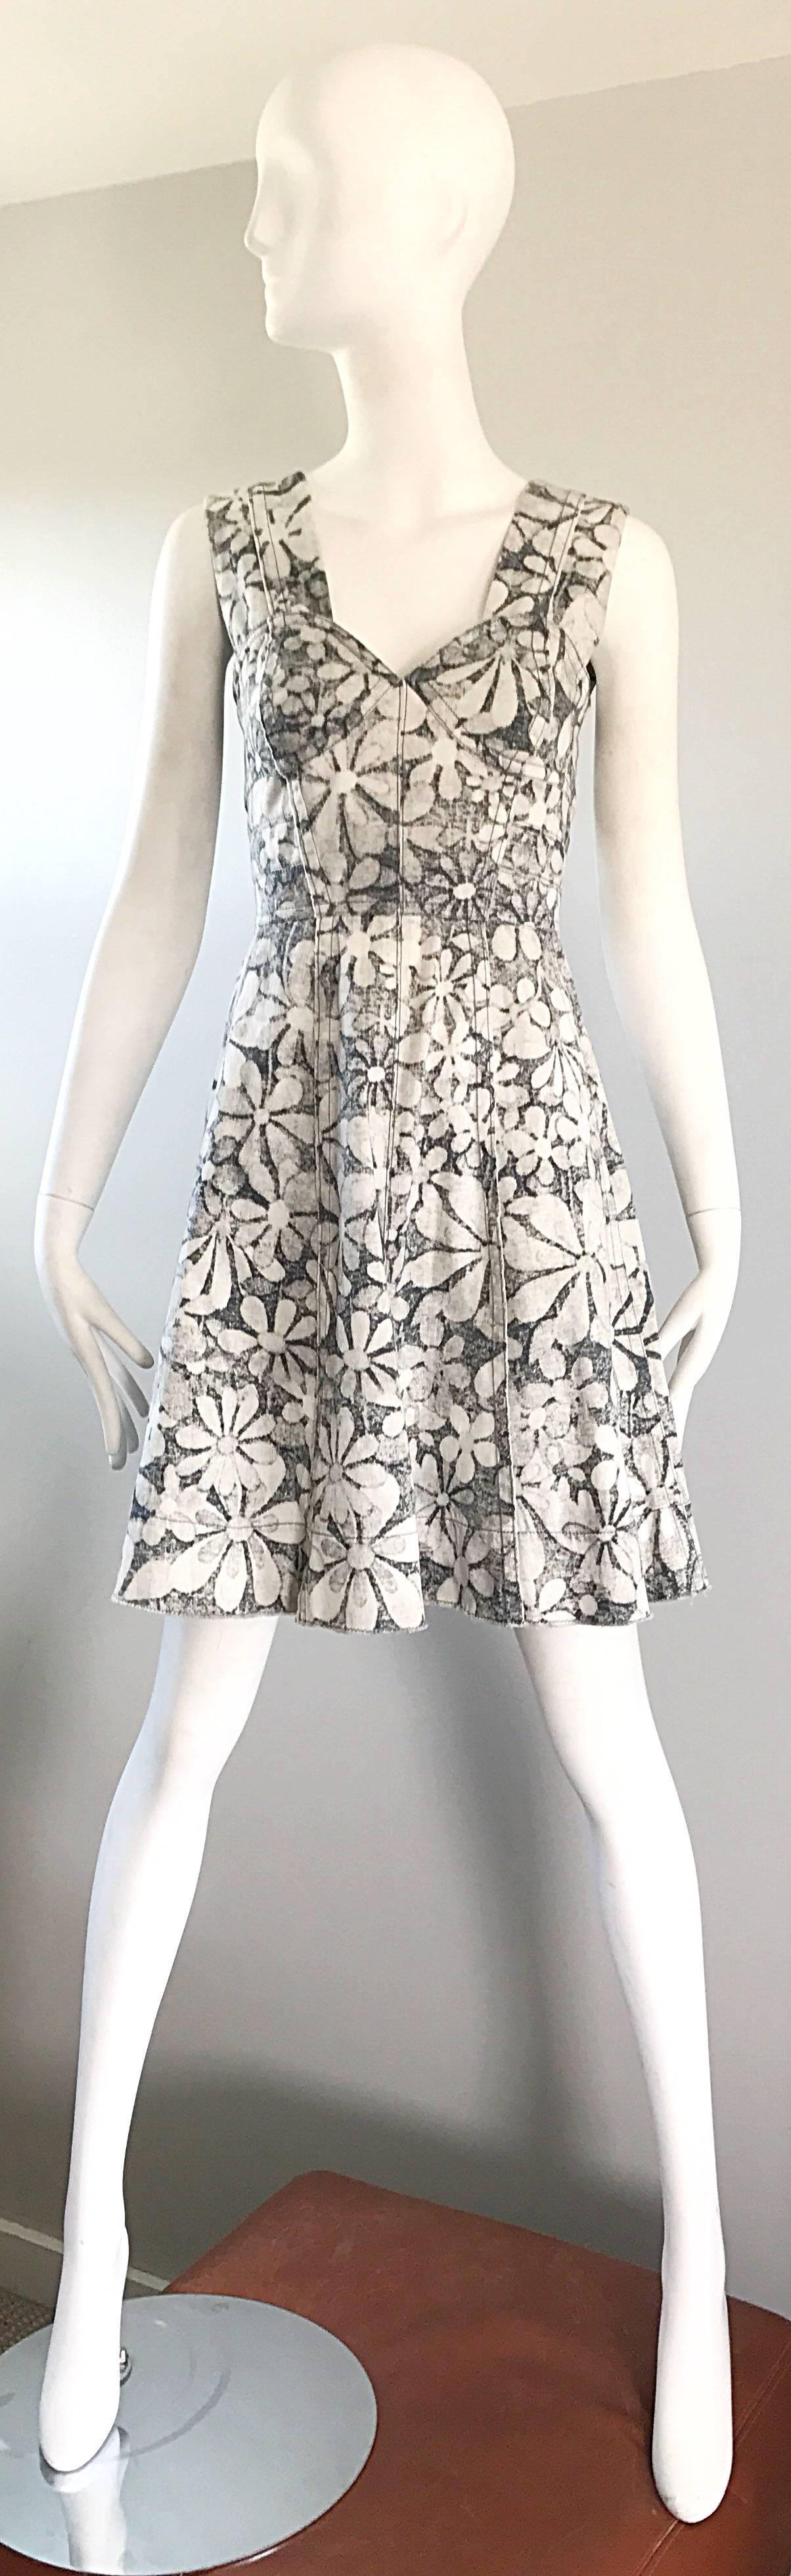 Chic brand new MARC JACOBS grey and white flower printed cotton denim dress! Features allover flowers printed throughout. Has a 1960s / 60s mod vibe that is effortlessly stylish! Corset styled bodice offers lots of support. Features pockets at each